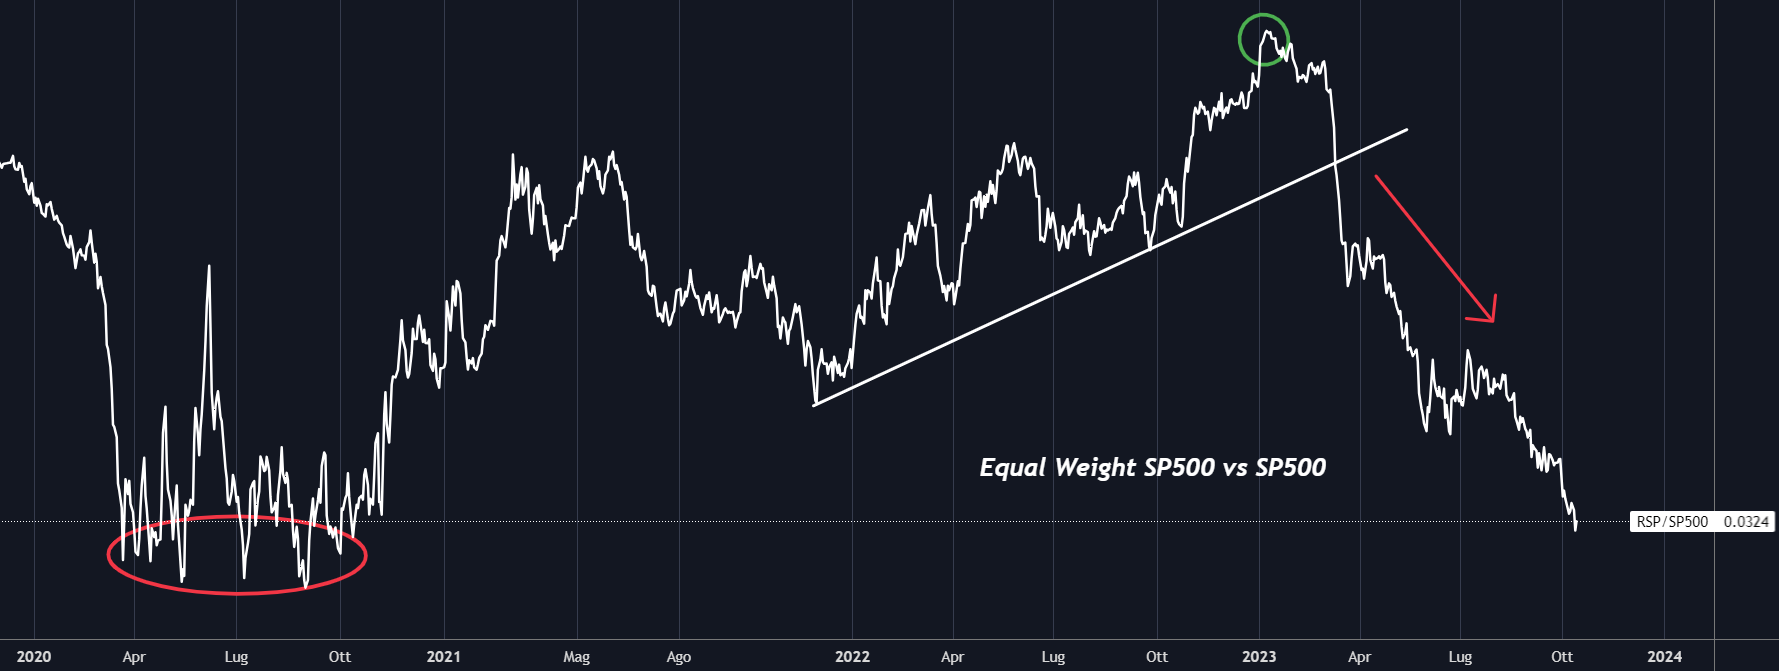 Equal Weight SP500 vs SP500